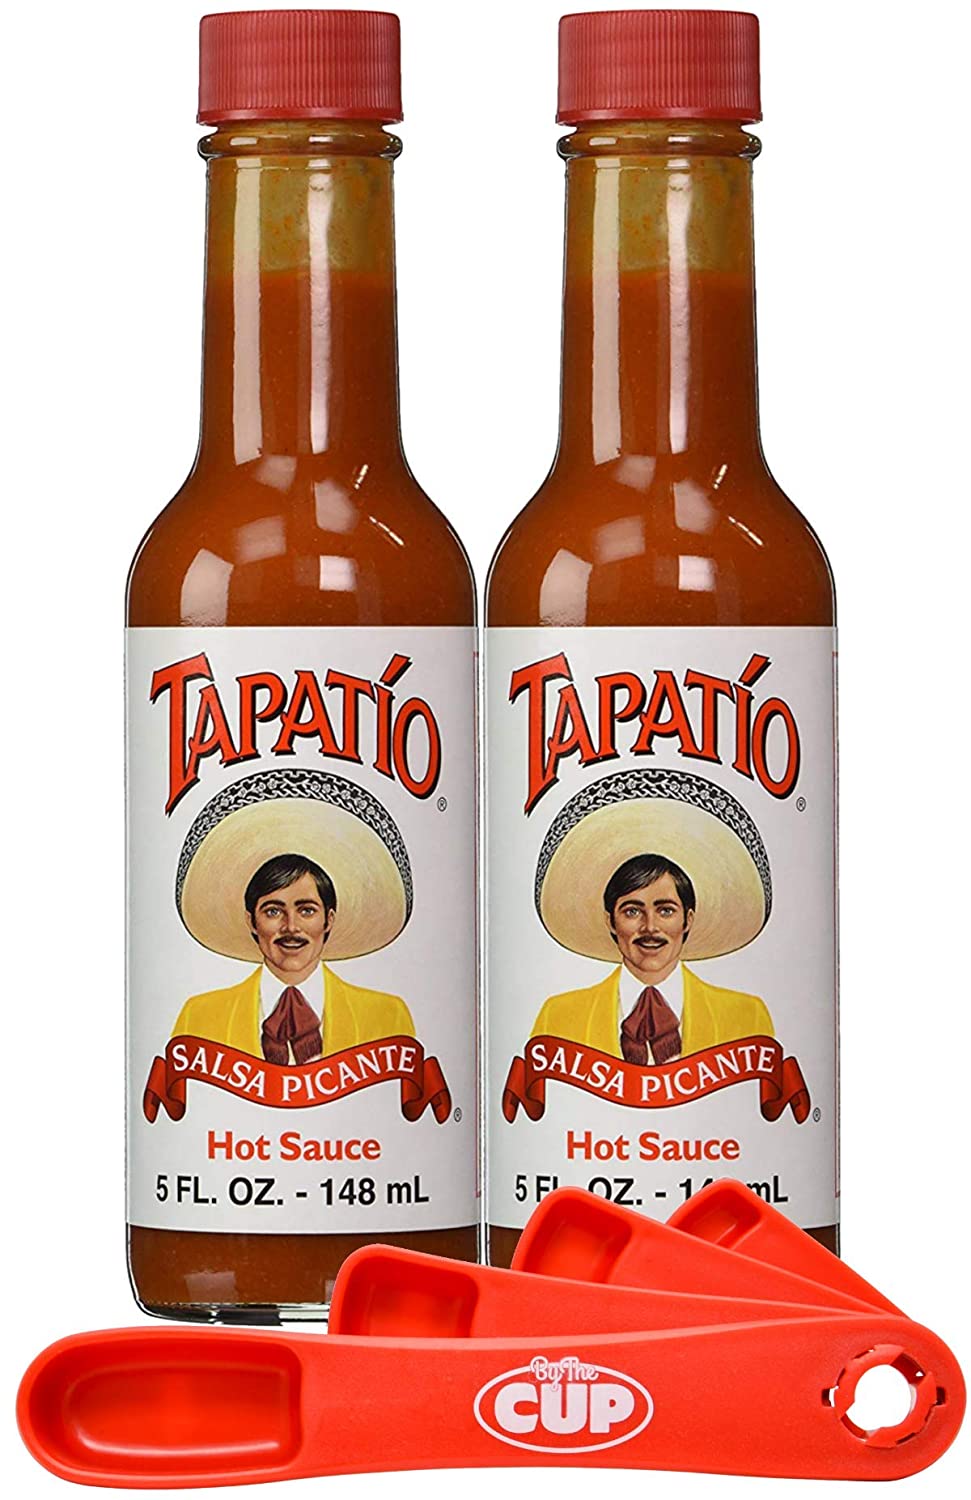 Tapatio Salsa Picante Hot Sauce 5 Ounce Bottle (Pack of 2) with By The Cup Measuring Spoons